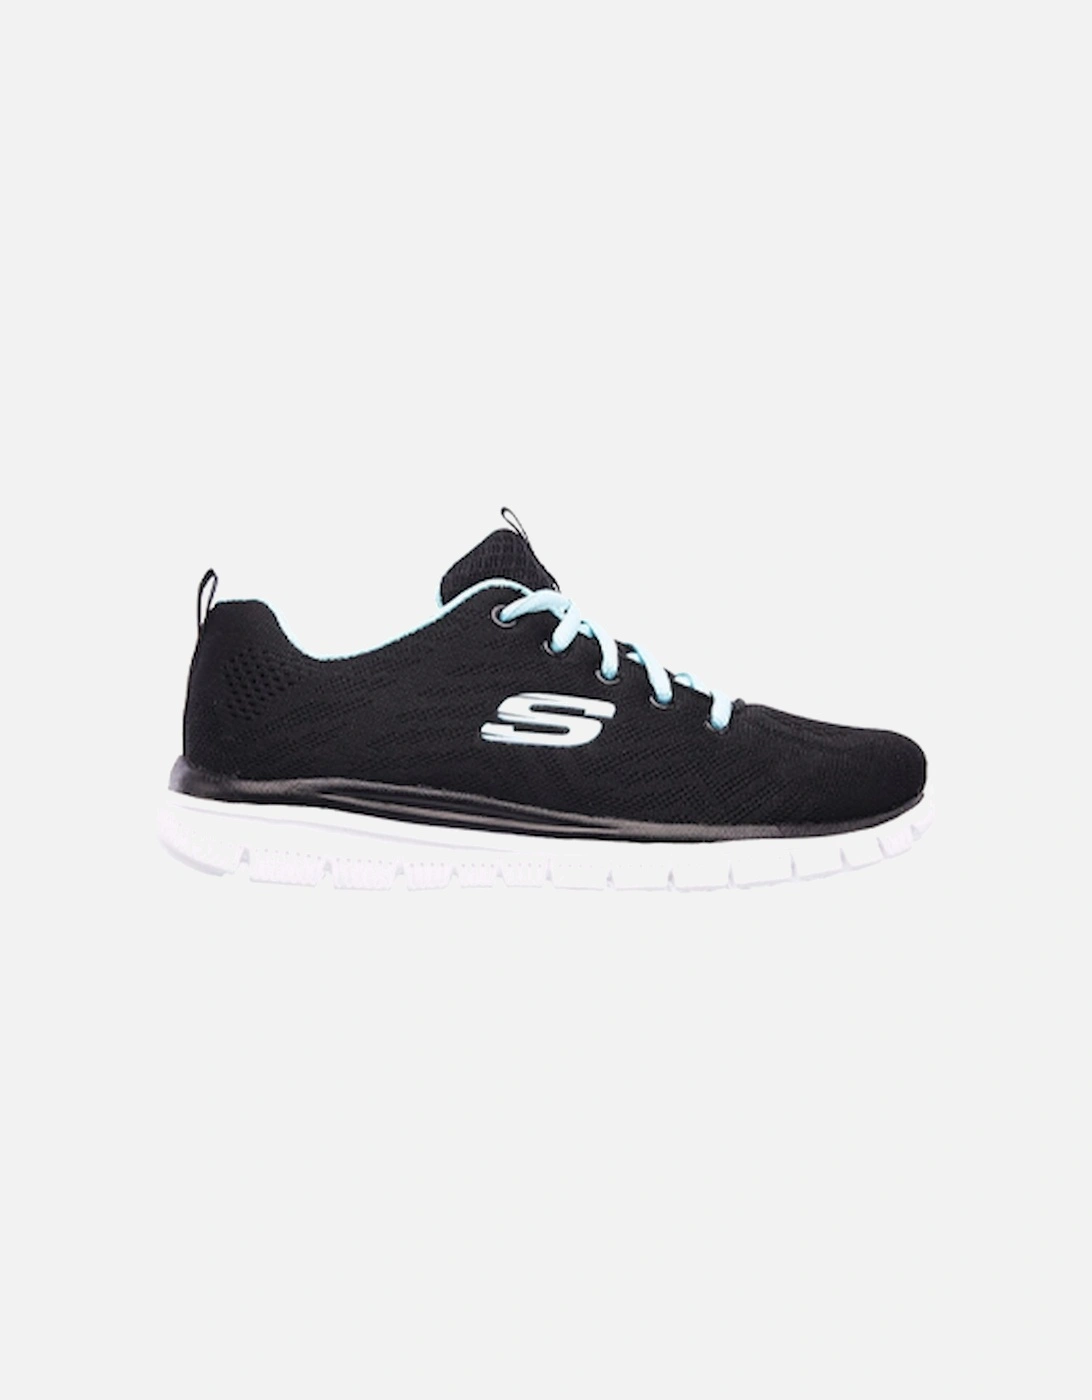 Women's Graceful Get Connected Sports Shoe Black/Turquoise, 6 of 5